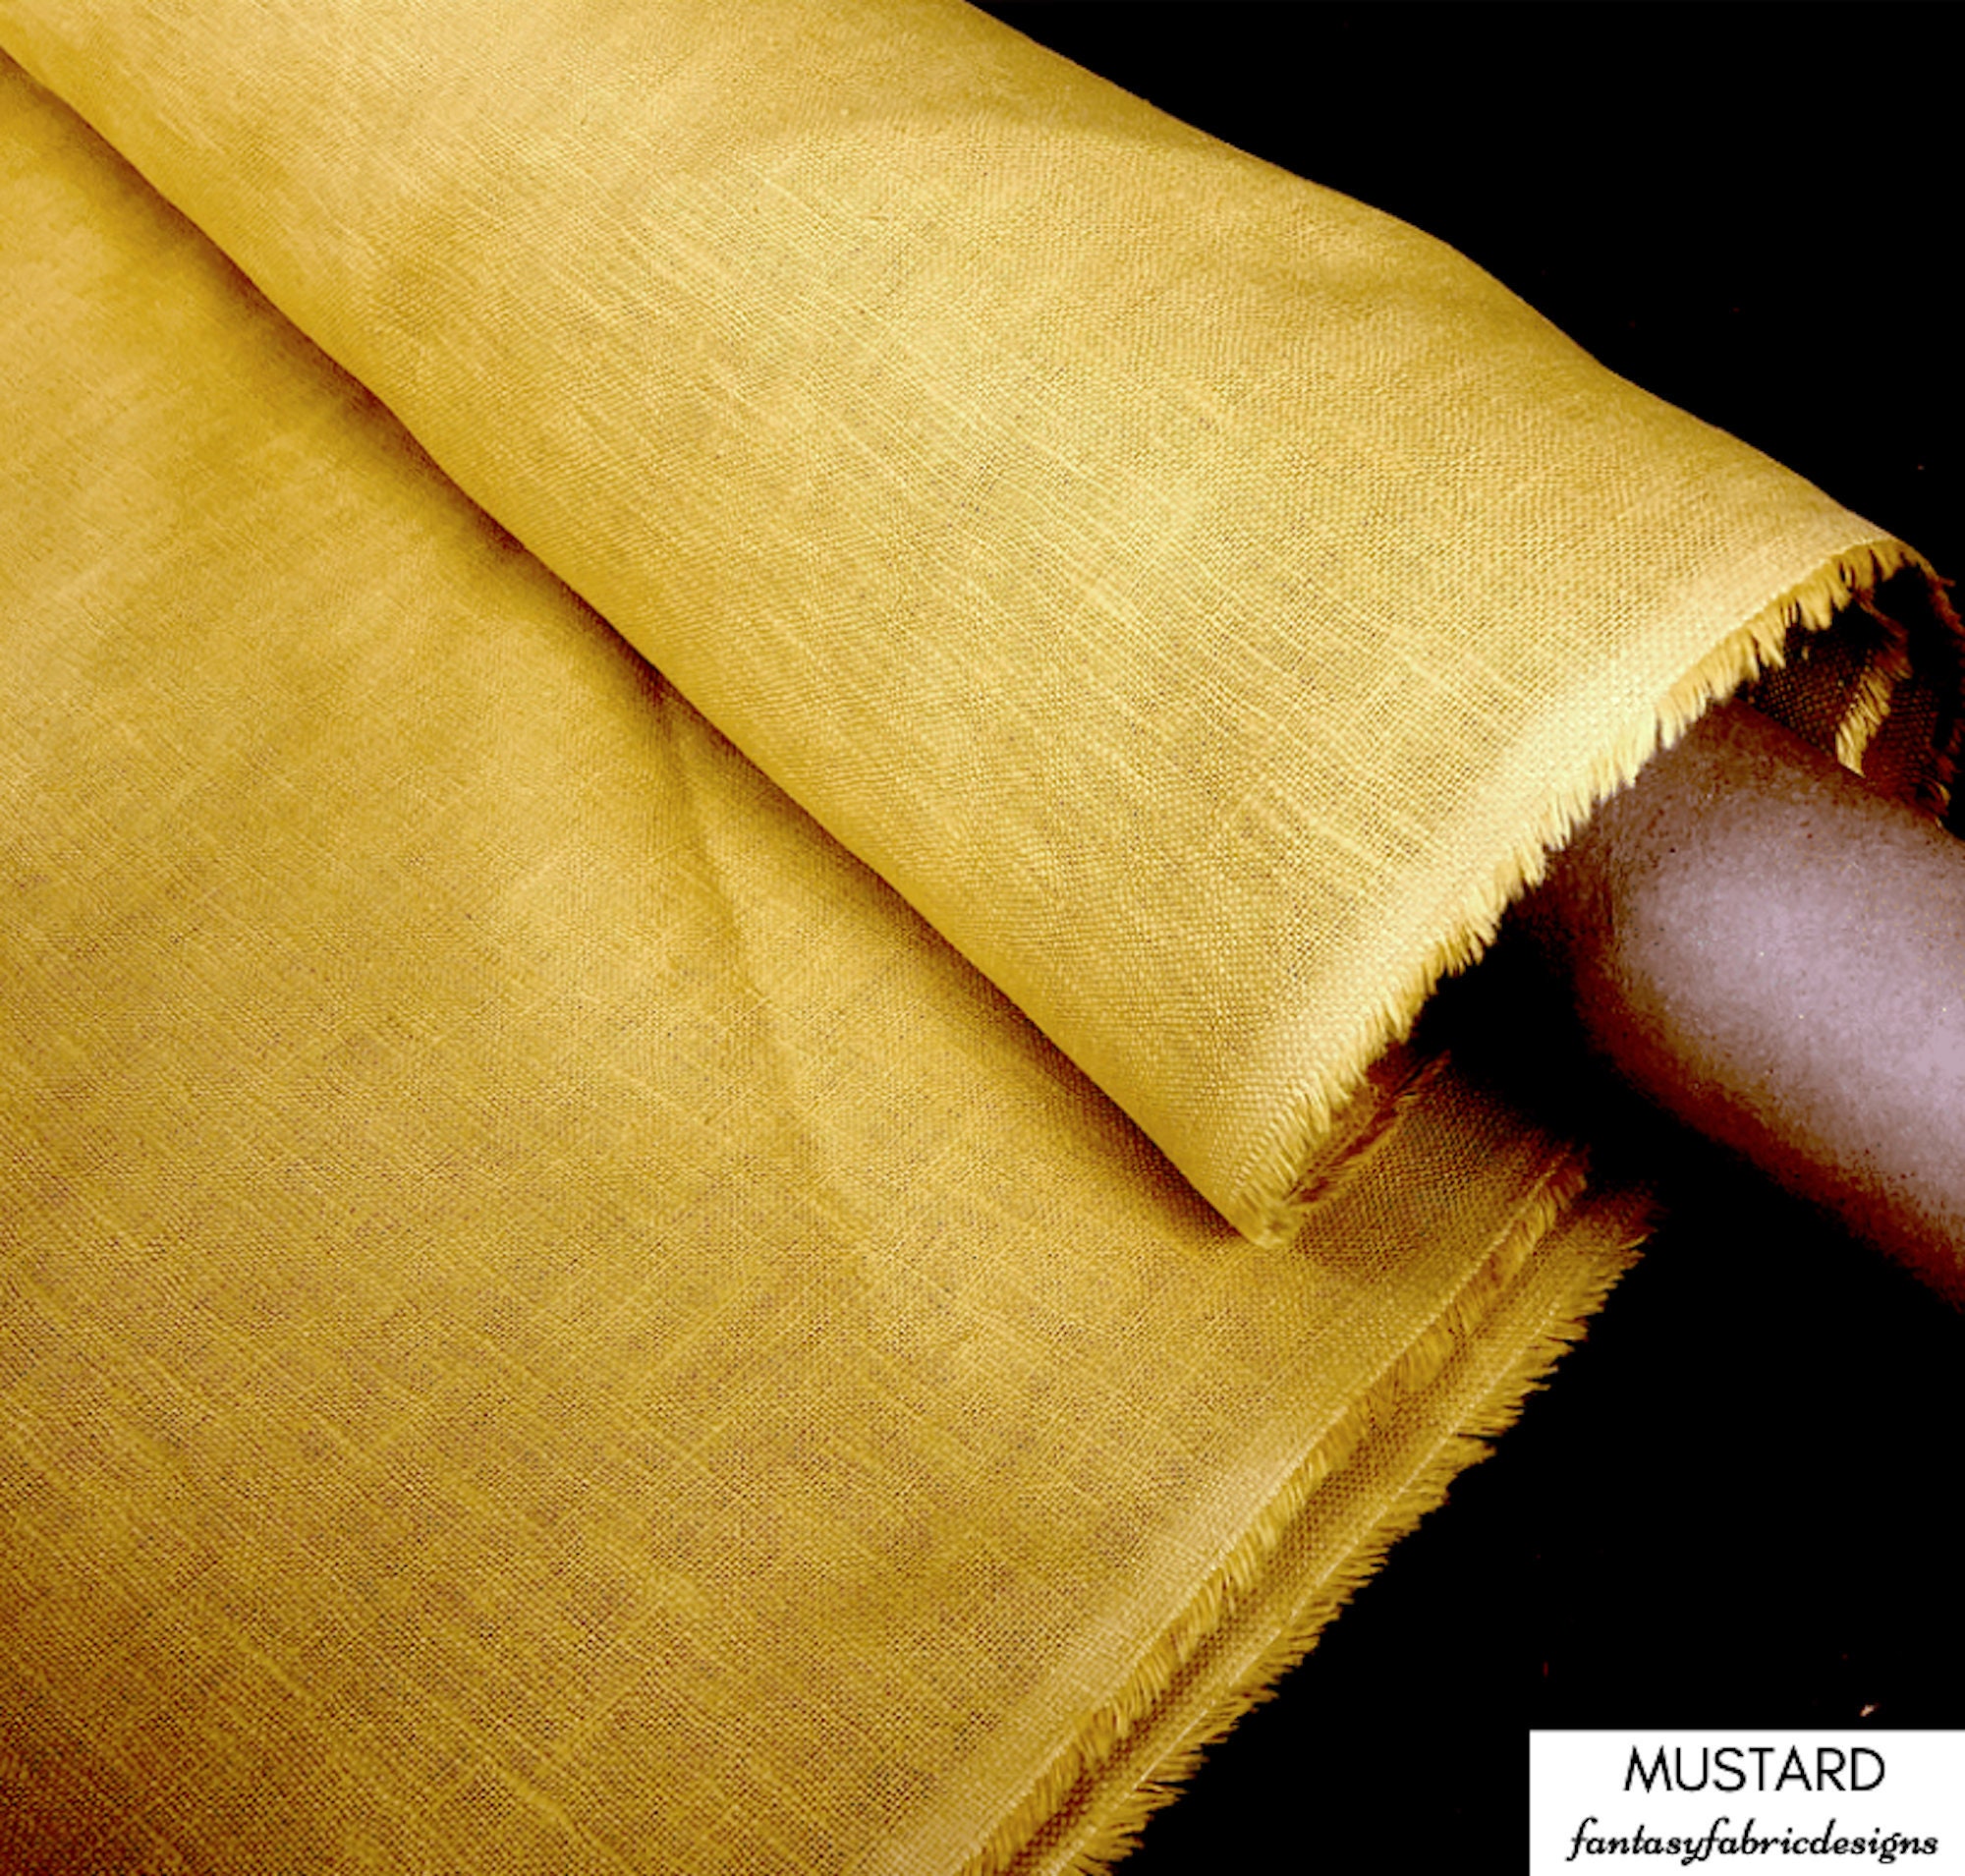 100% Natural Raw Cotton Fabric by the Yard or Meter, 